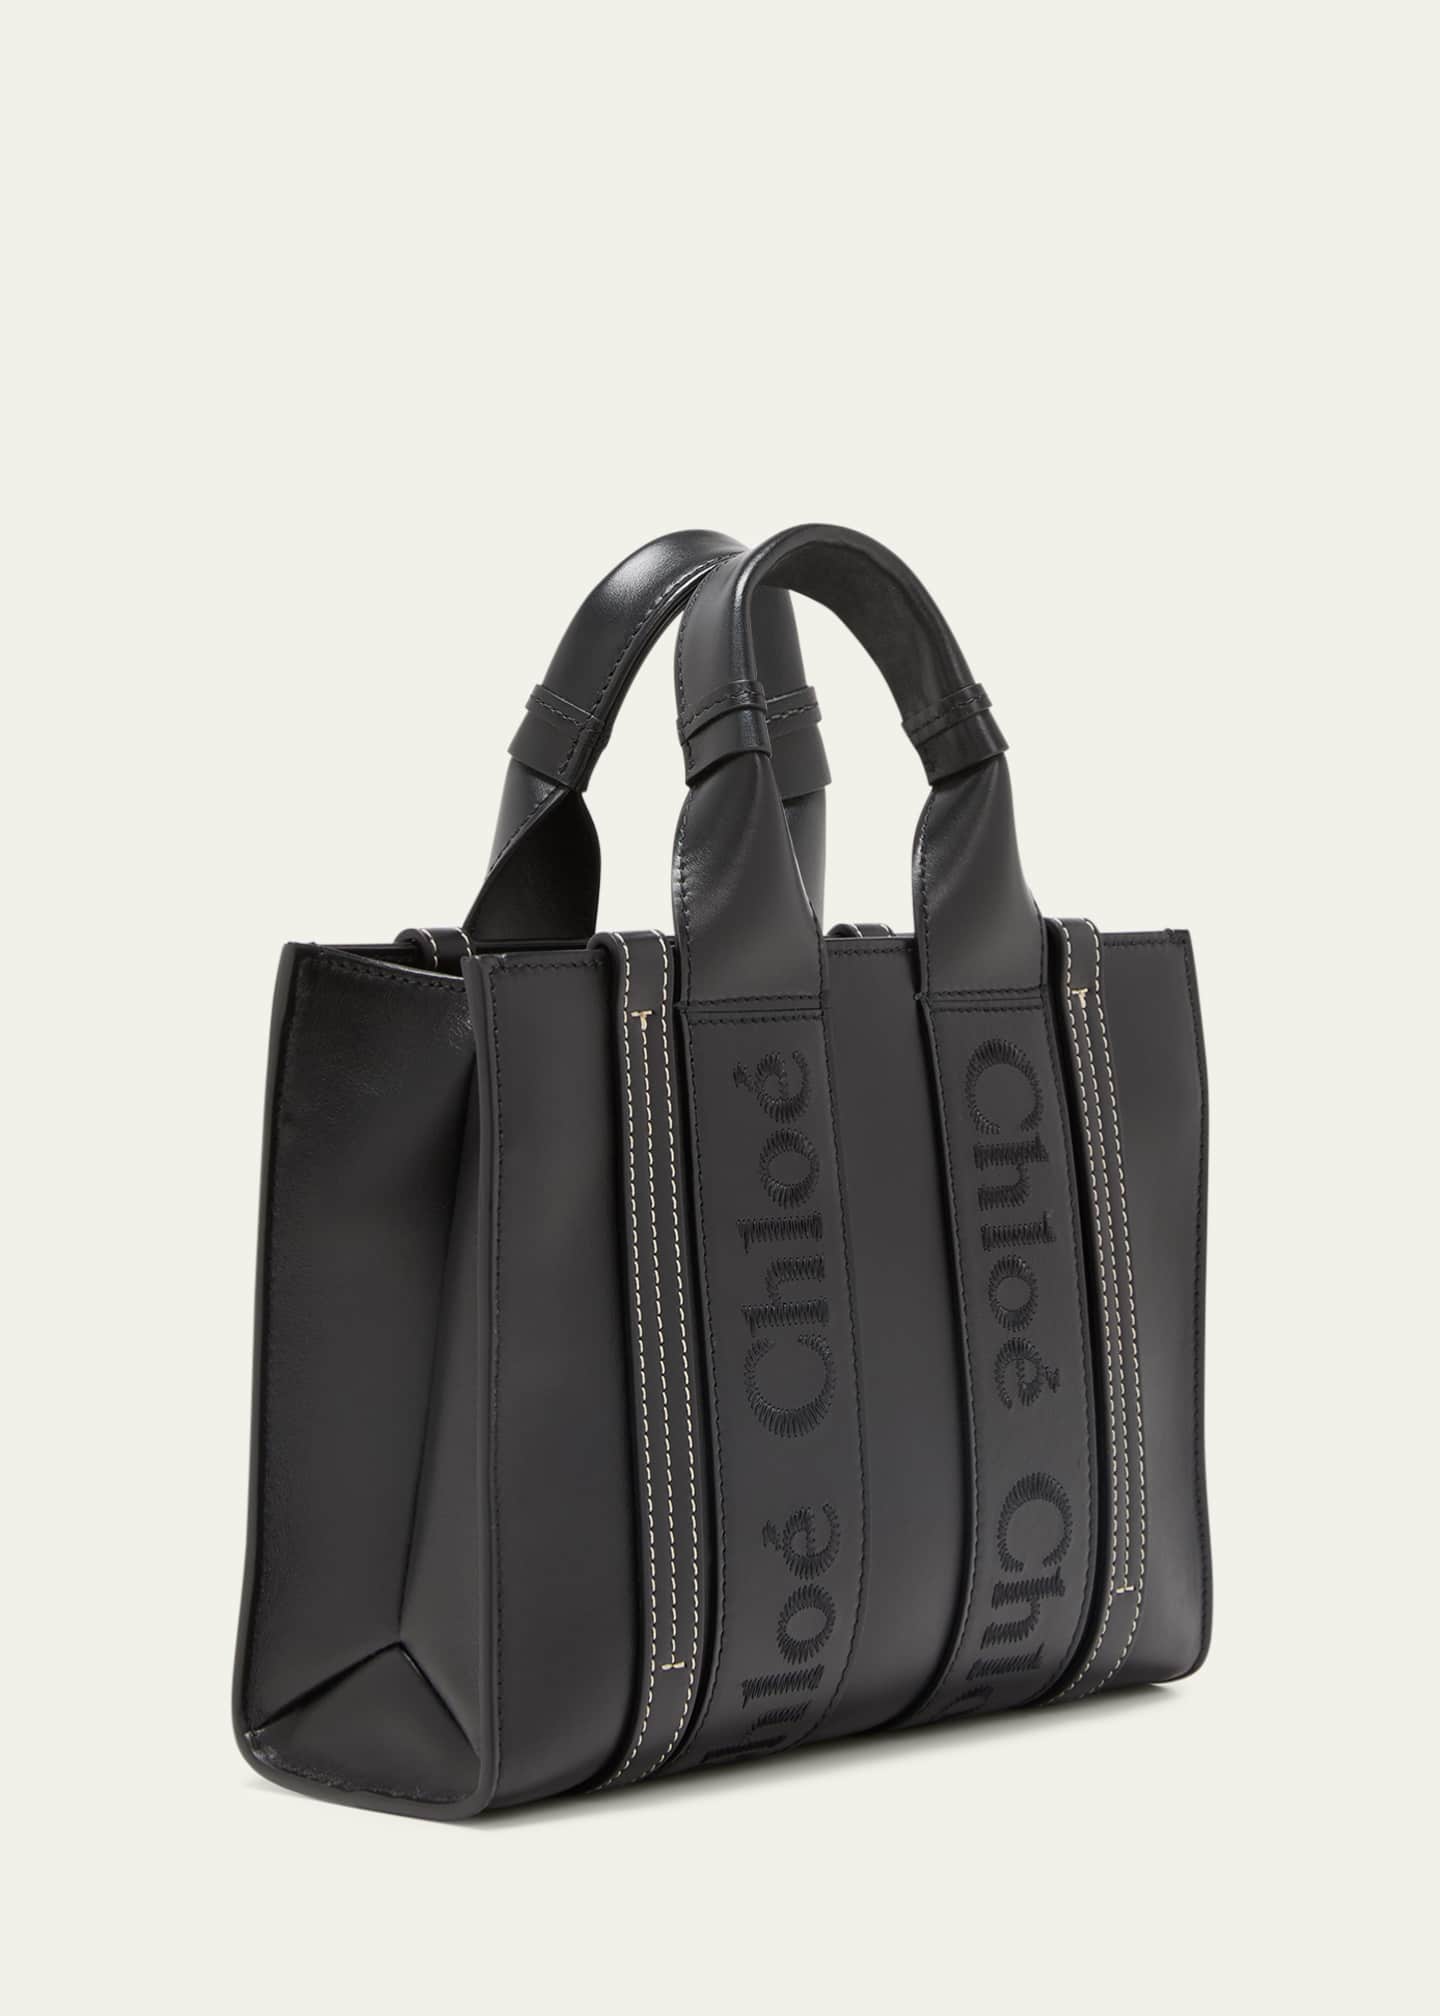 Chloe Woody Small Tote Bag in Leather with Crossbody Strap - Bergdorf ...